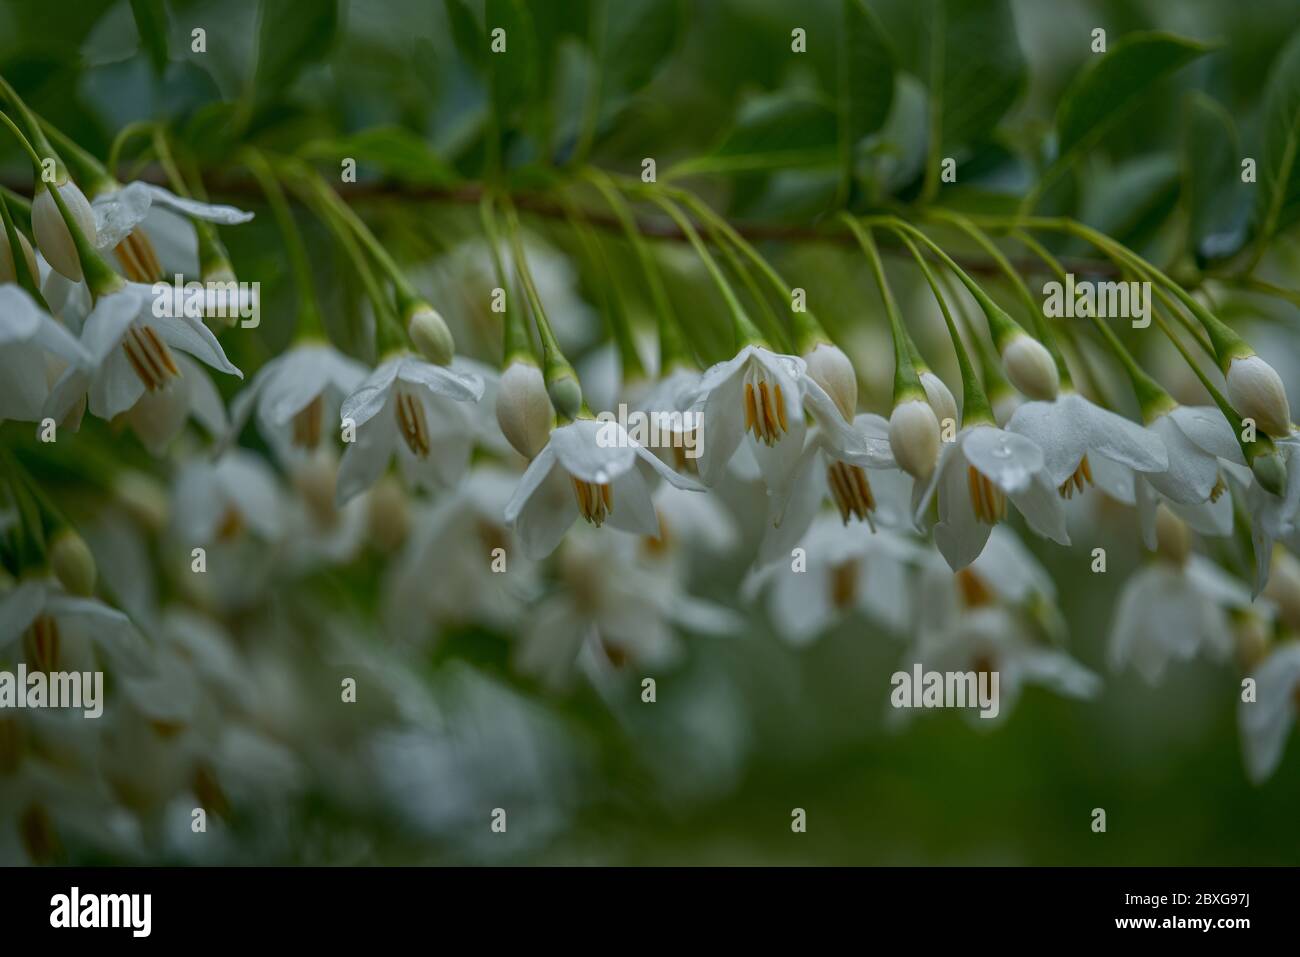 Styrax japonicus the Japanese snowbell flowers close up Stock Photo